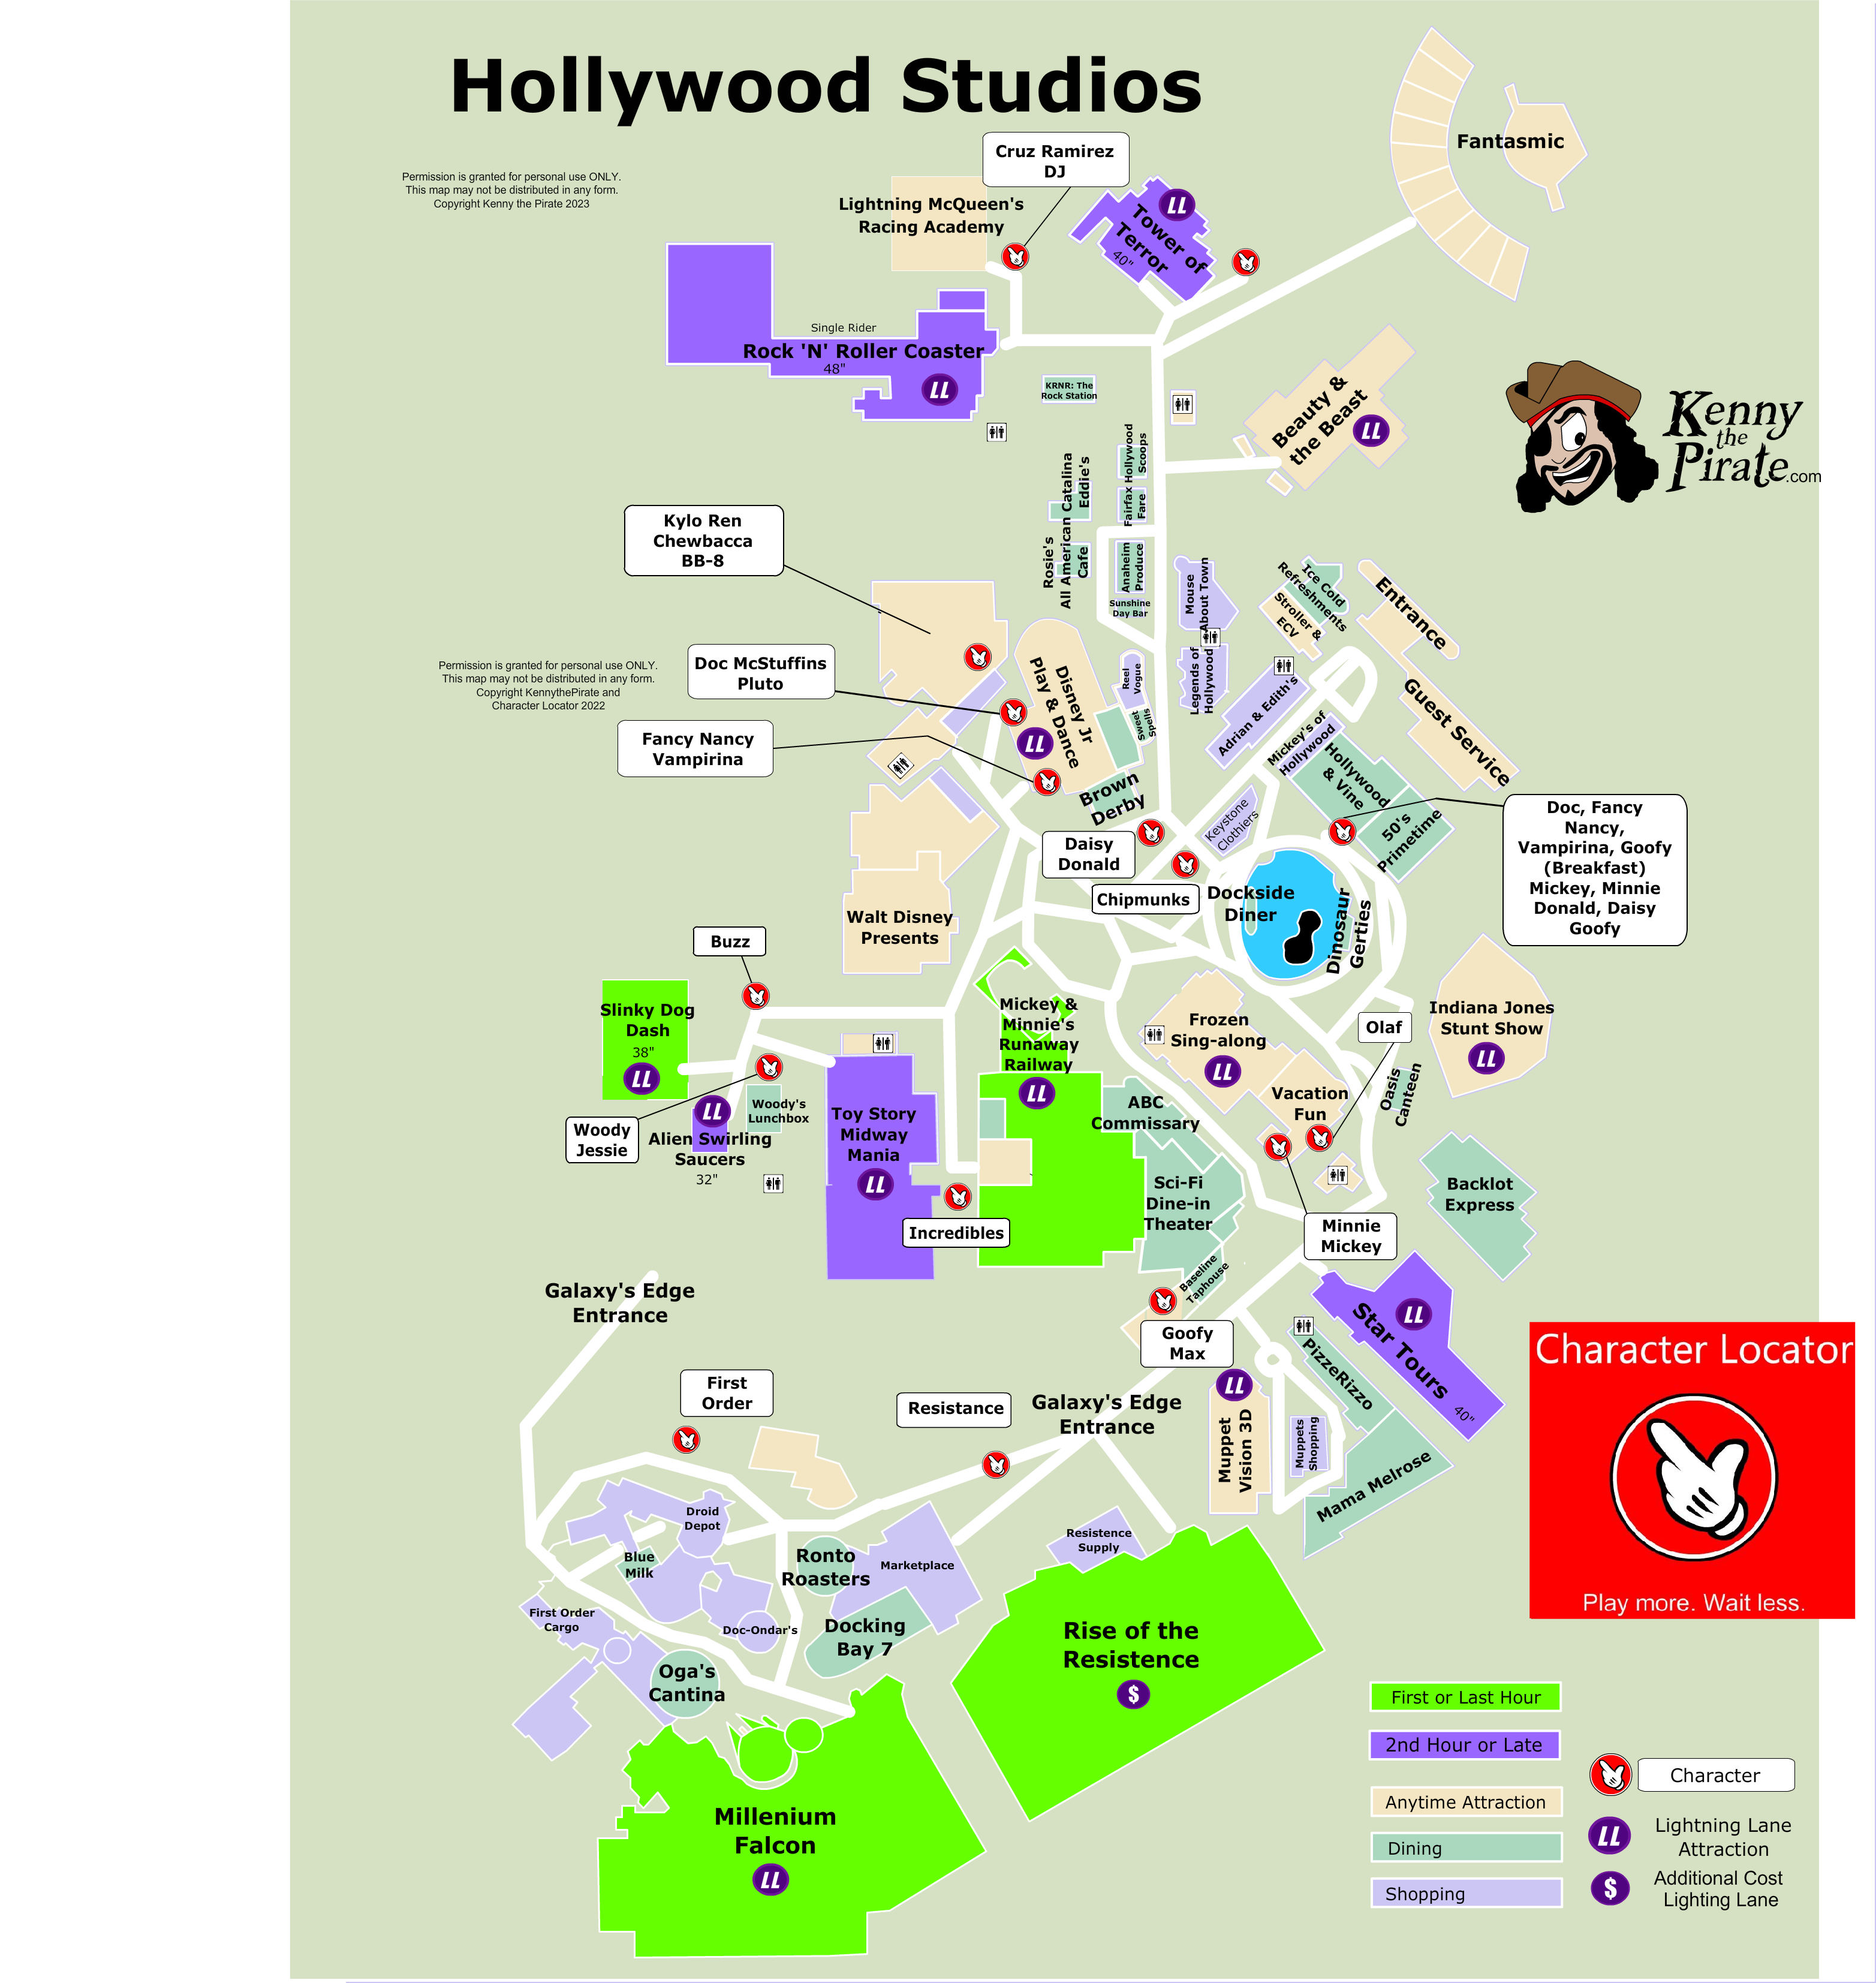 Hollywood Studios Character Location Map KennythePirate